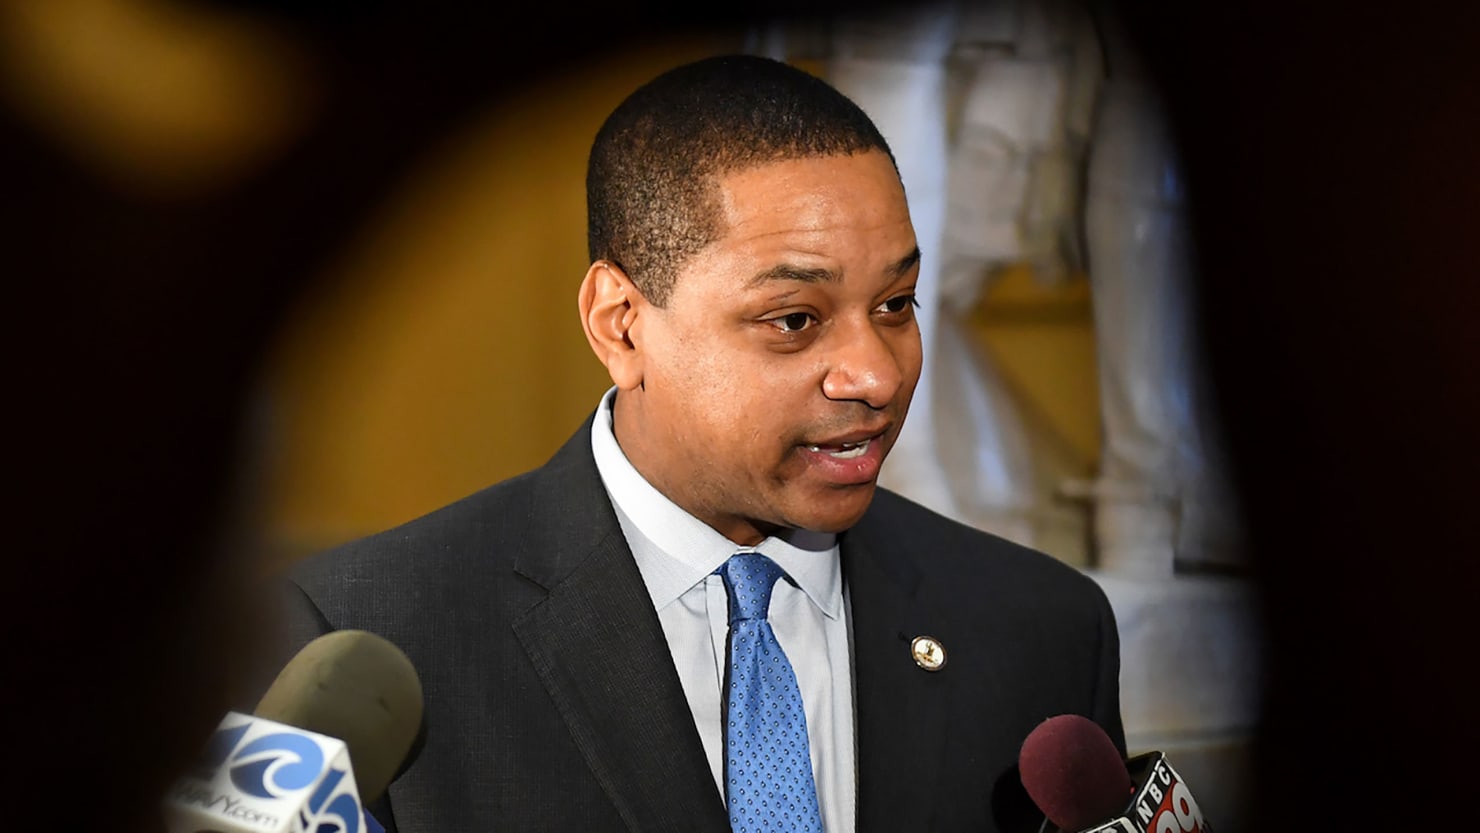 Women’s Advocacy Groups Keep Their Distance From The Justin Fairfax ...